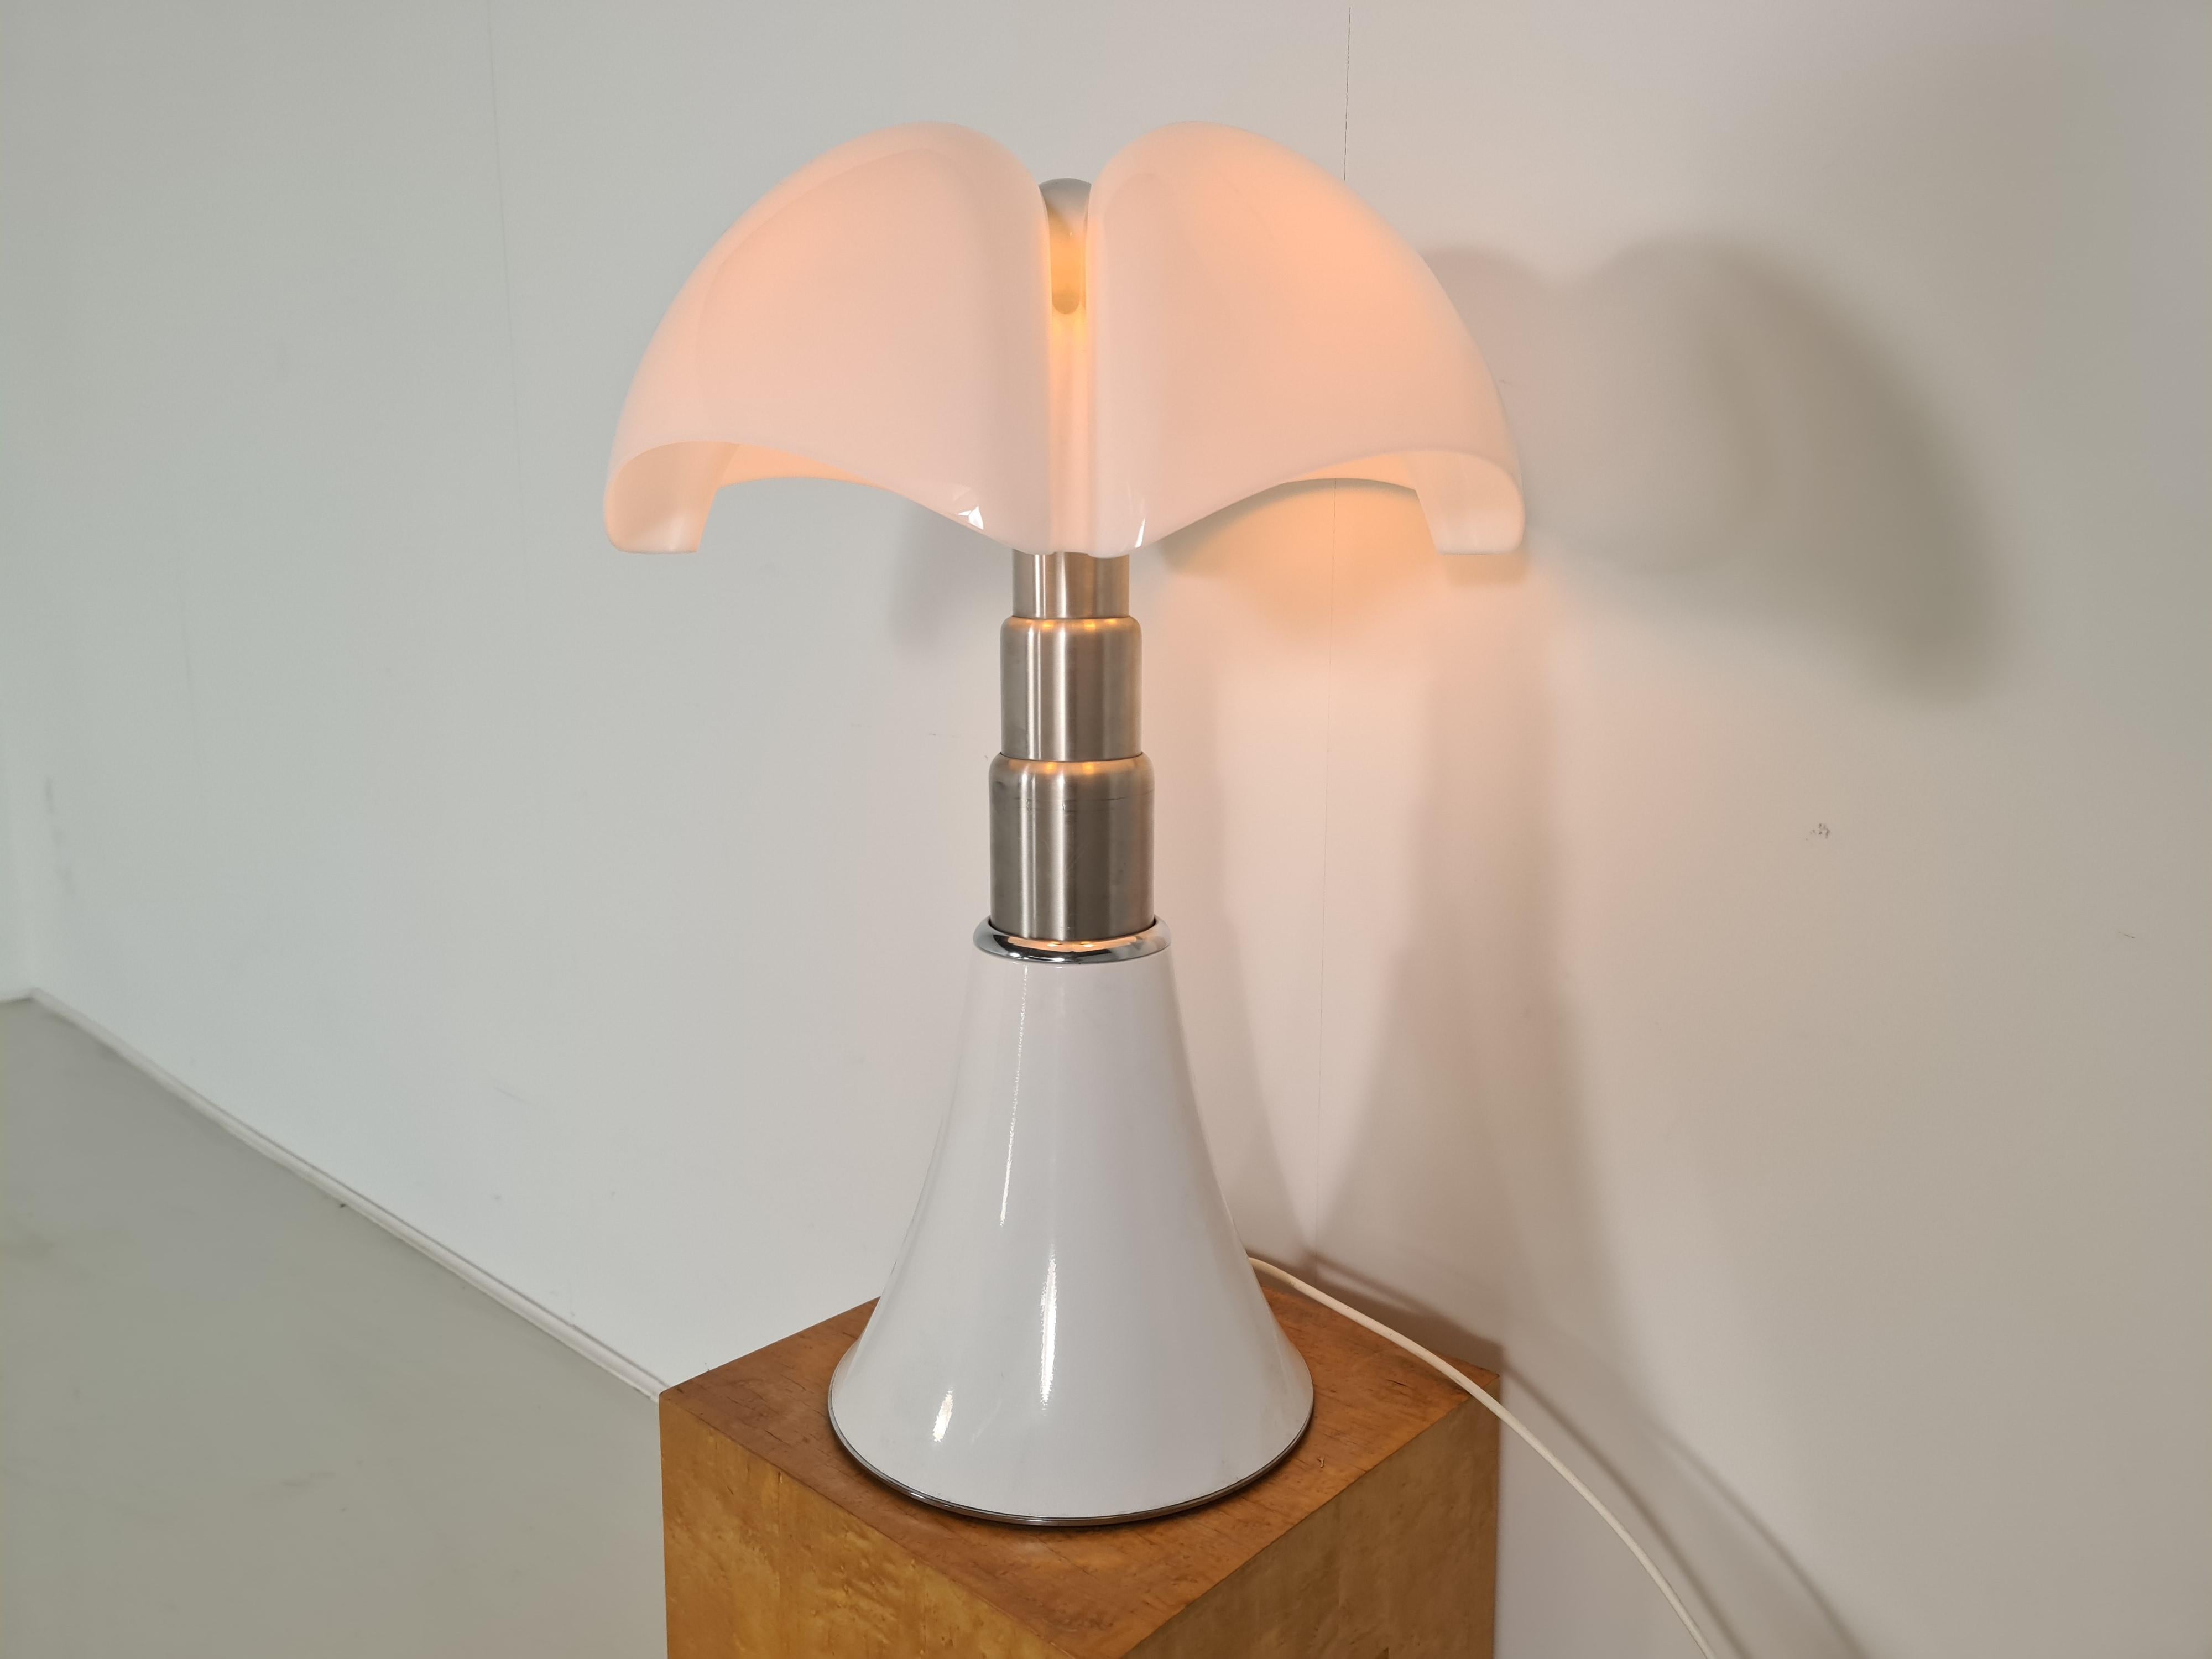 Pipistrello table lamp designed by Gae Aulenti for Martinelli Luce. The table lamp has a stainless steel telescopic system that makes it possible to adjust the height, and the lampshade is made with white opal methacrylate, Italy, 1980s.